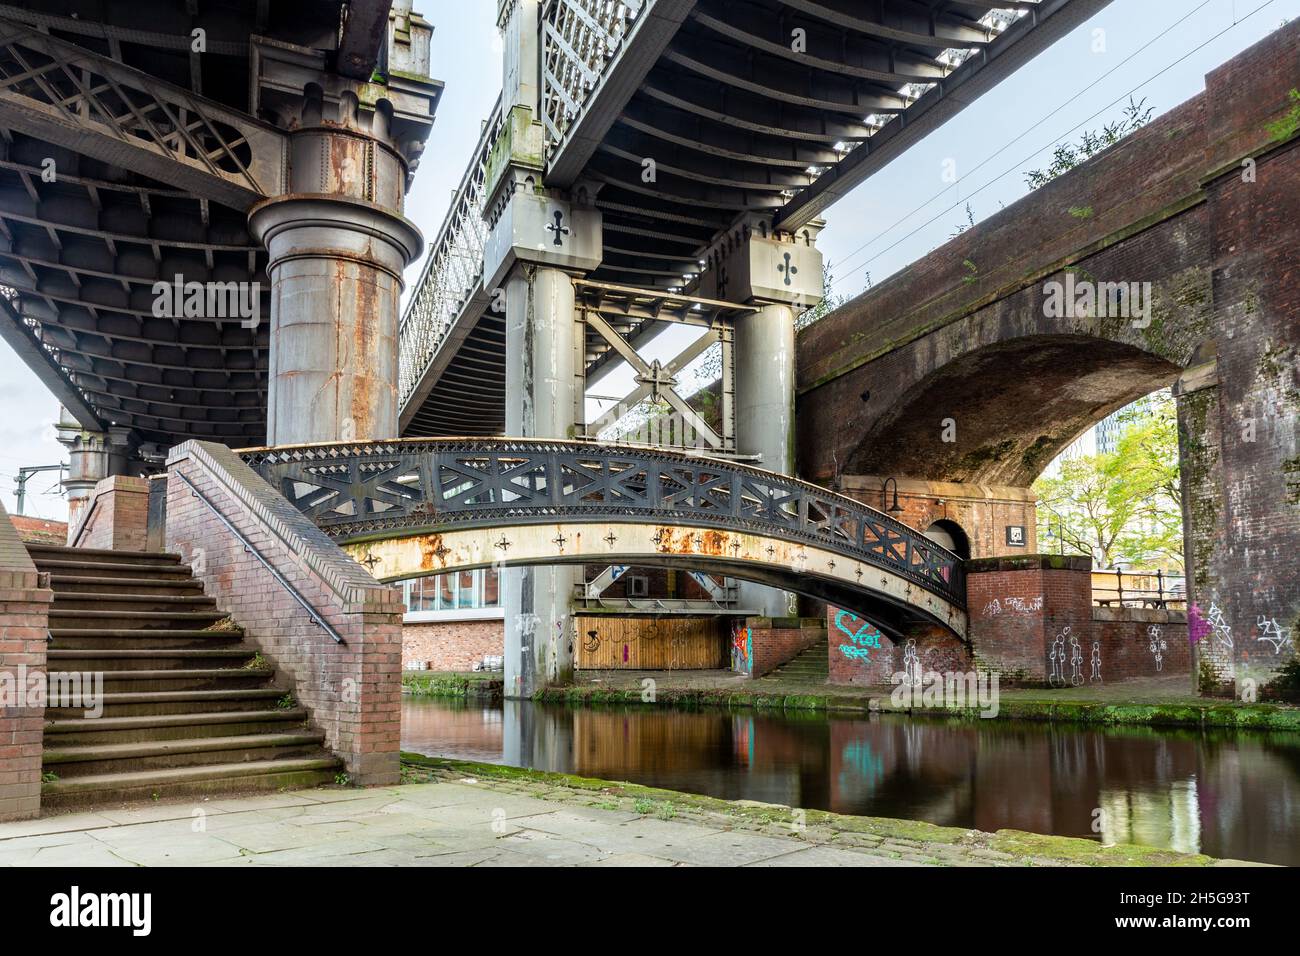 Castlefield urban heritage park. Old & modern railway viaducts and bridges using old (cast iron and brick) and modern steel architecture. Deansgate, M Stock Photo